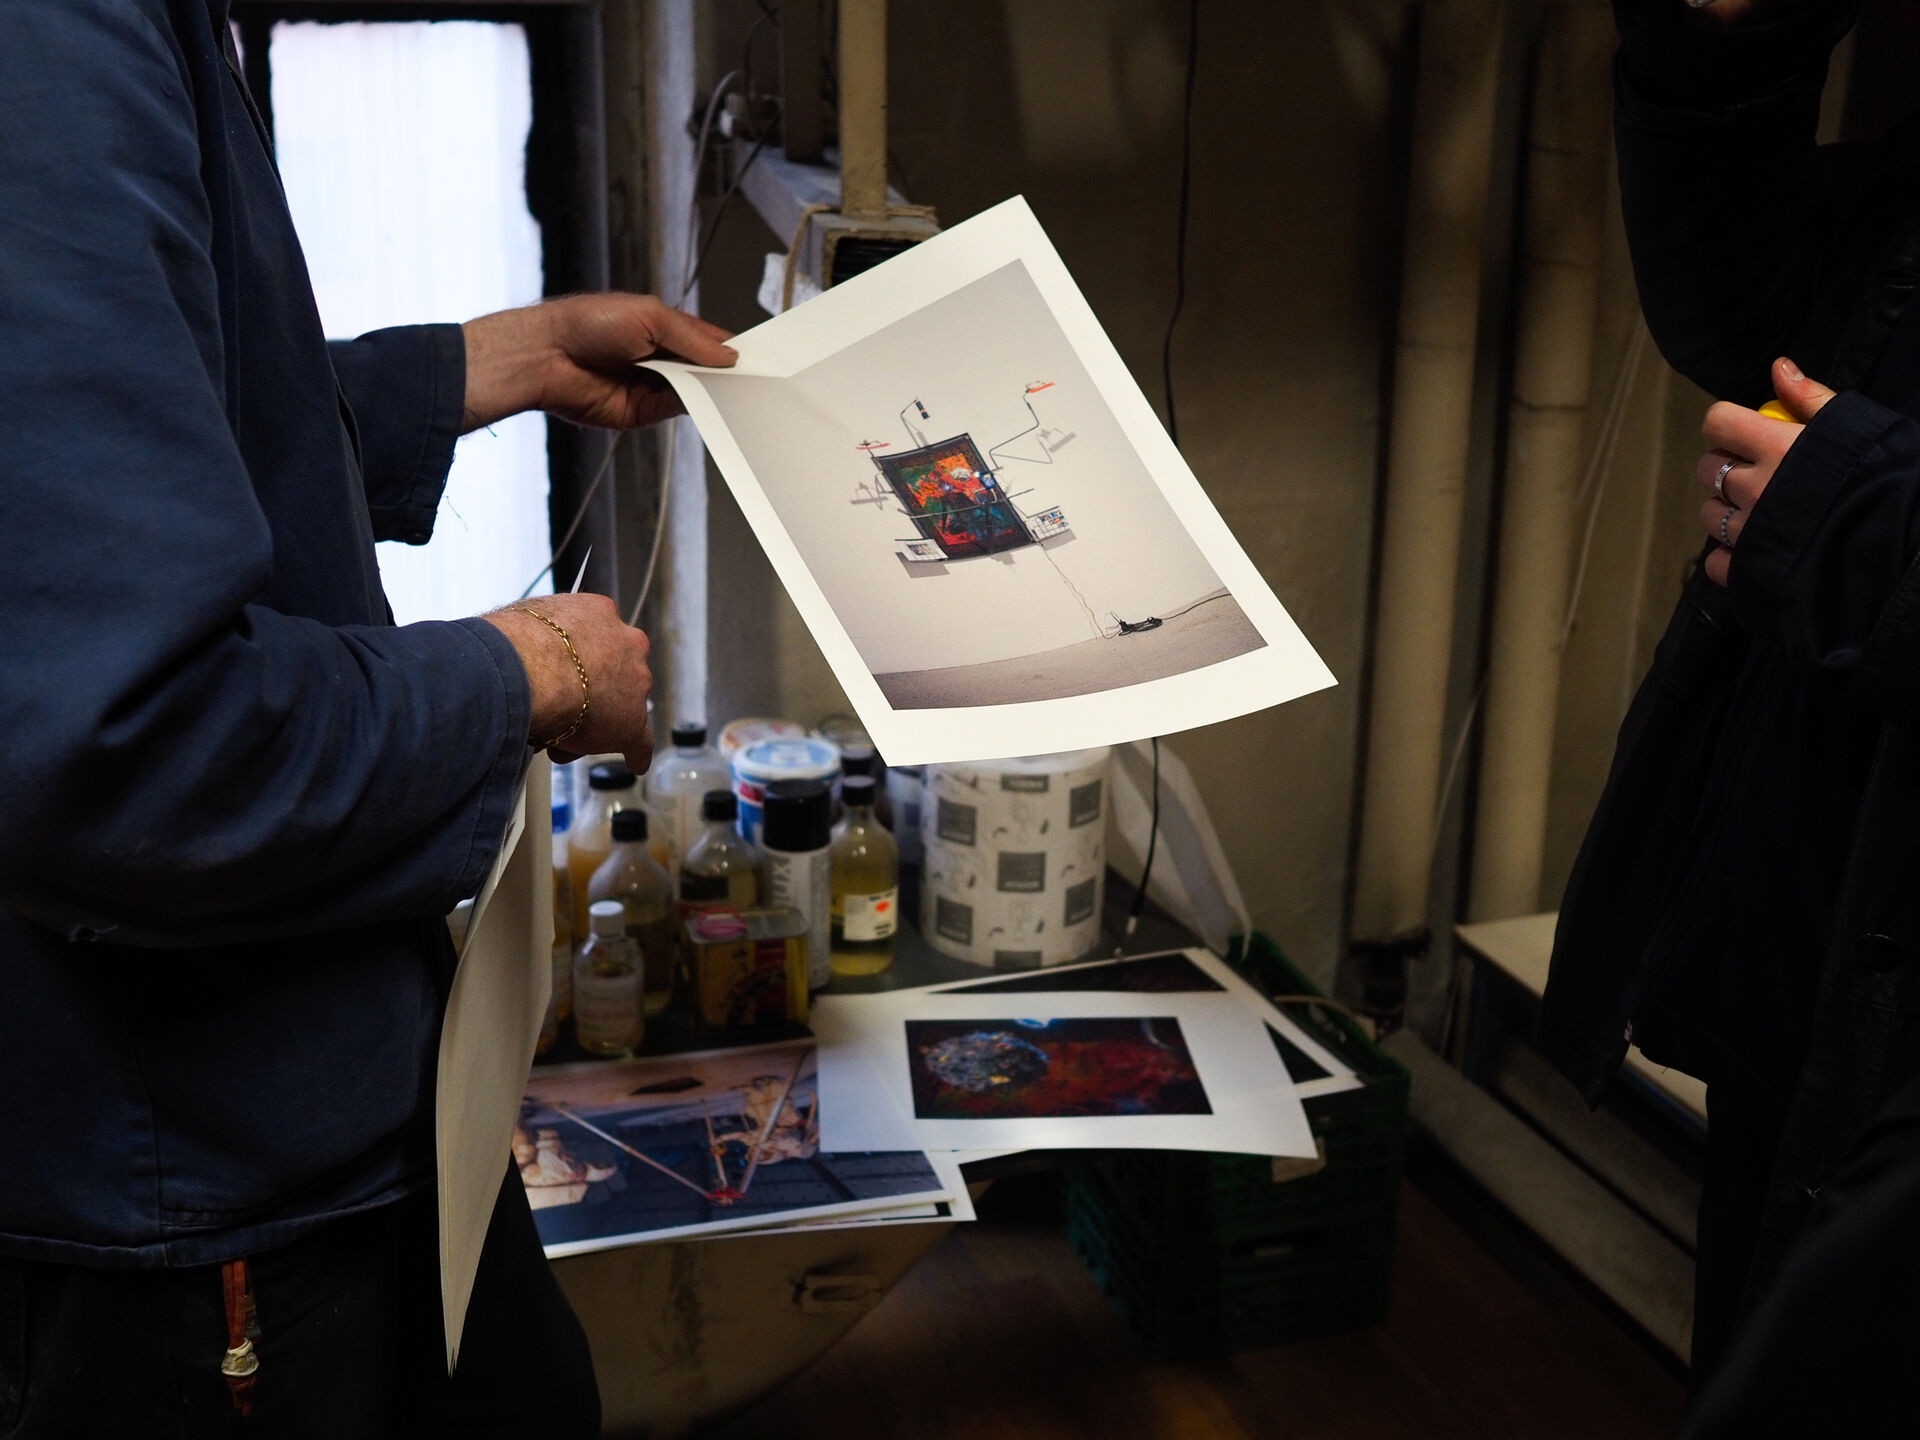 Person holding a printed image